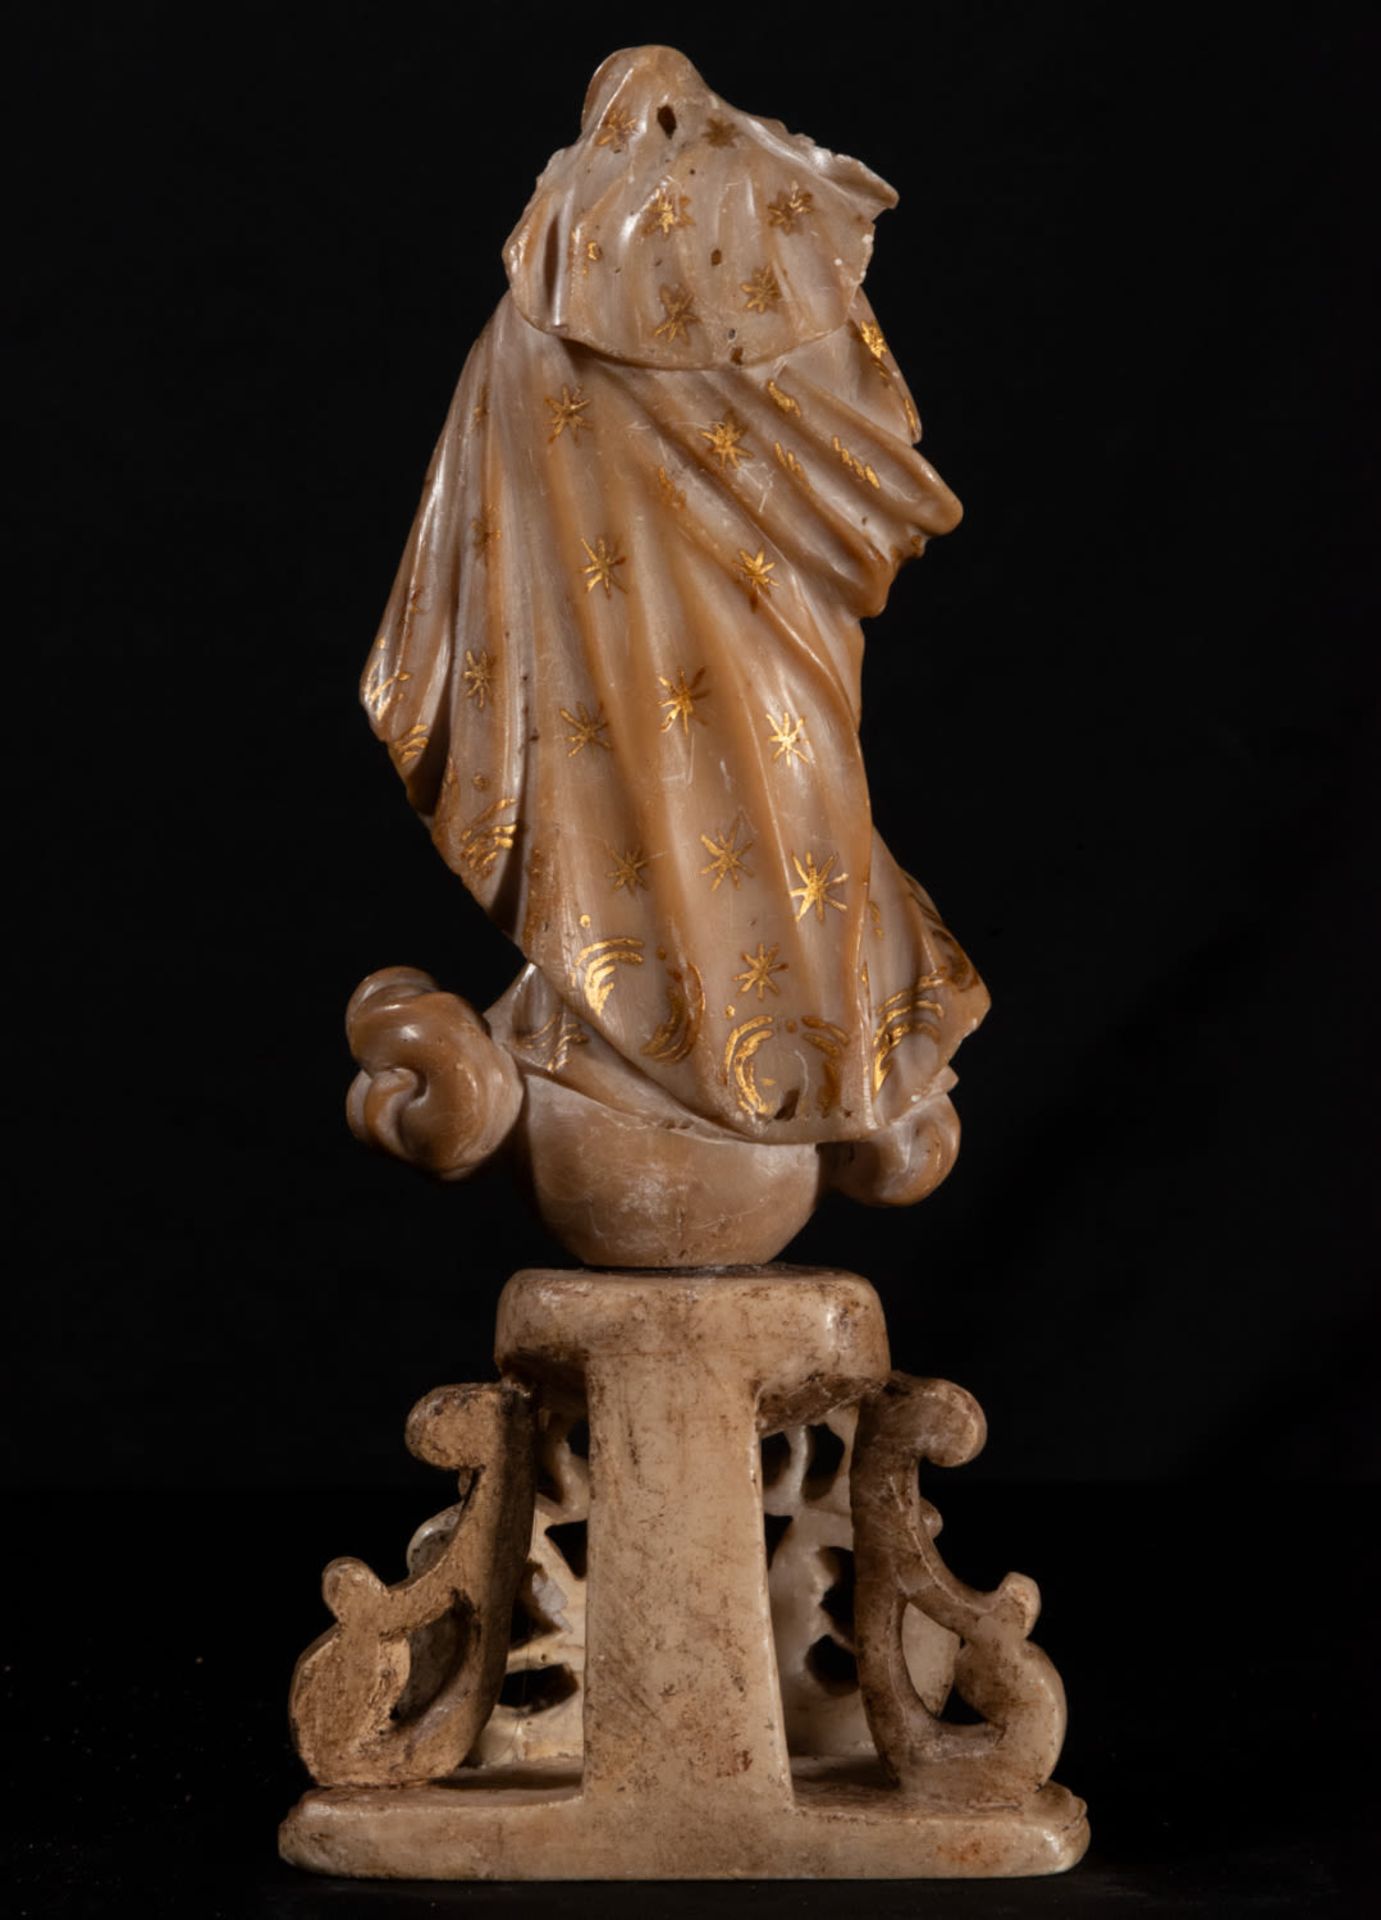 Beautiful Immaculate Virgin in Peruvian colonial Glory, Viceregal work of the 17th century - Image 7 of 7